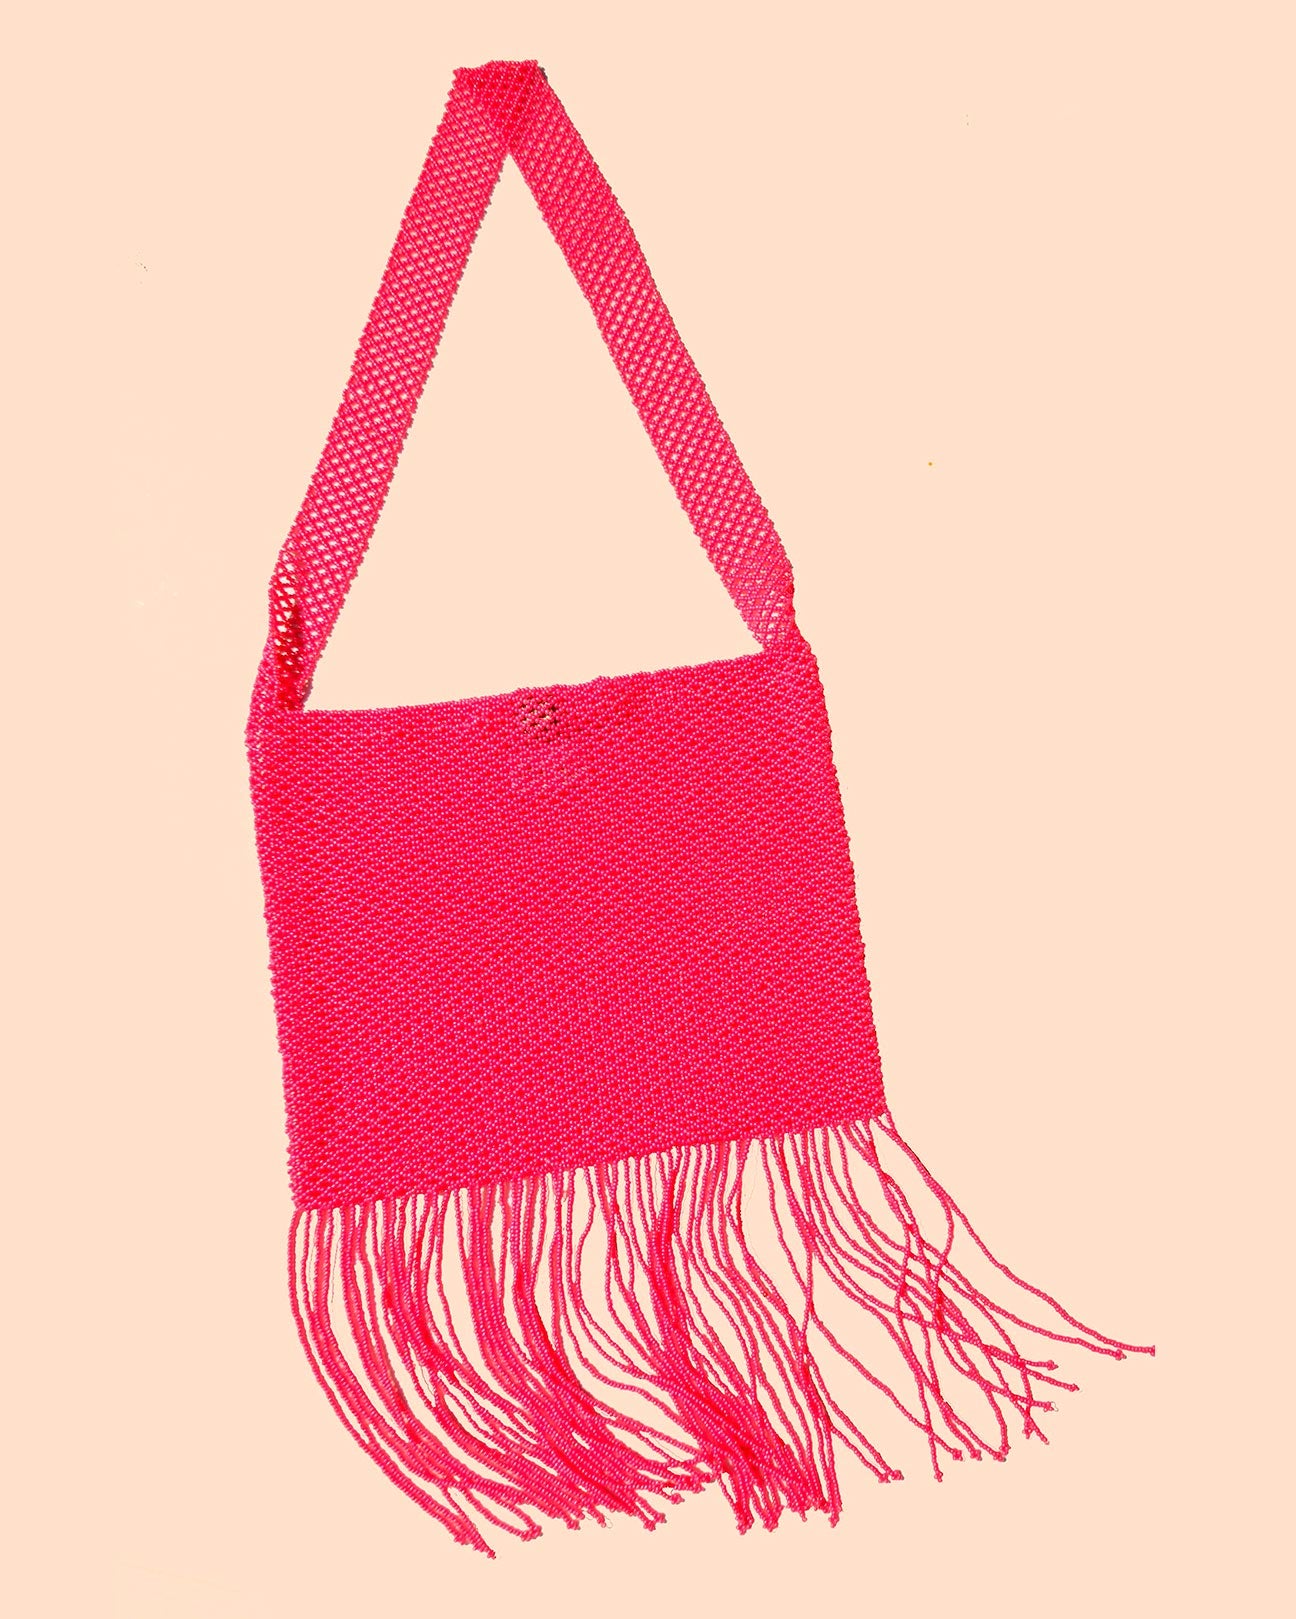 A product picture of the Marmaclub Crossover Fringe bag in color Hot Pink (medium dark pink))